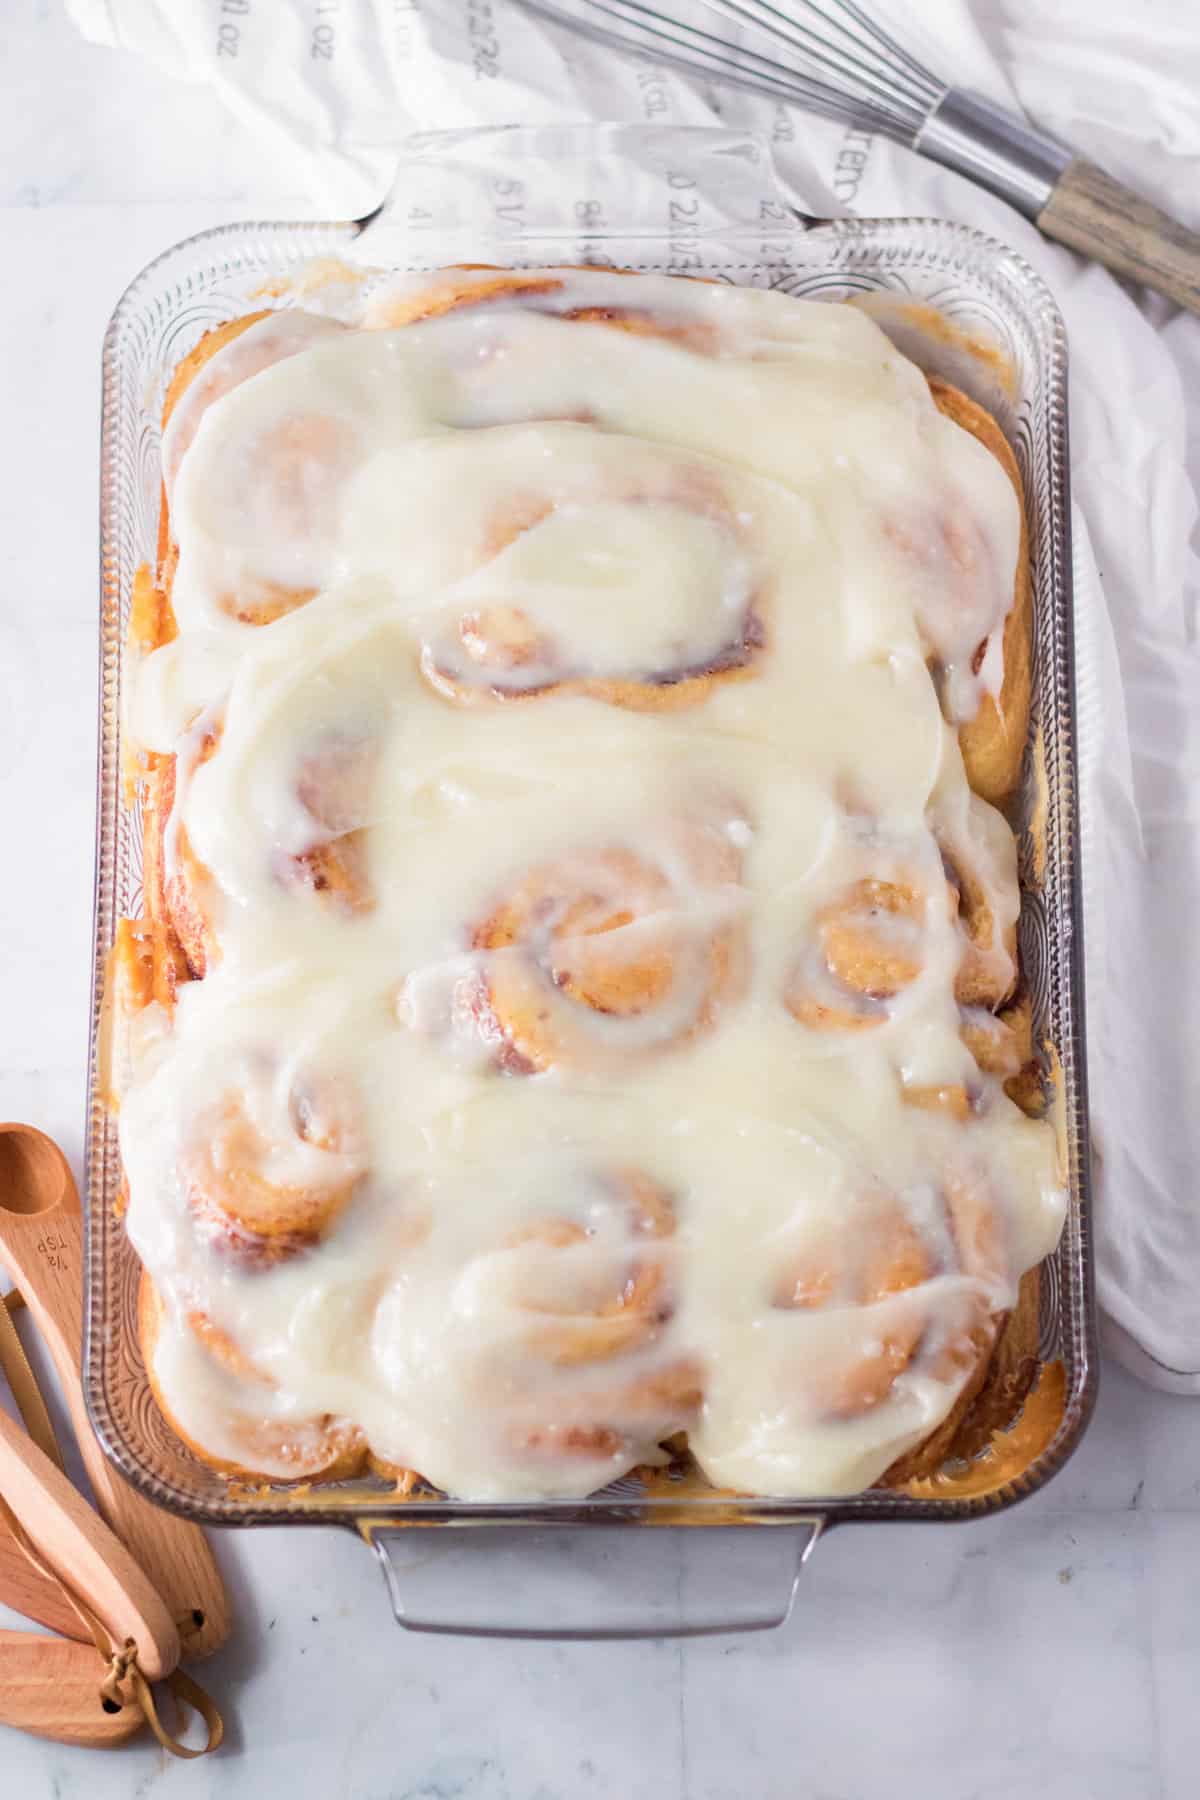 Cinnamon rolls with cream cheese frosting in a glass casserole dish.